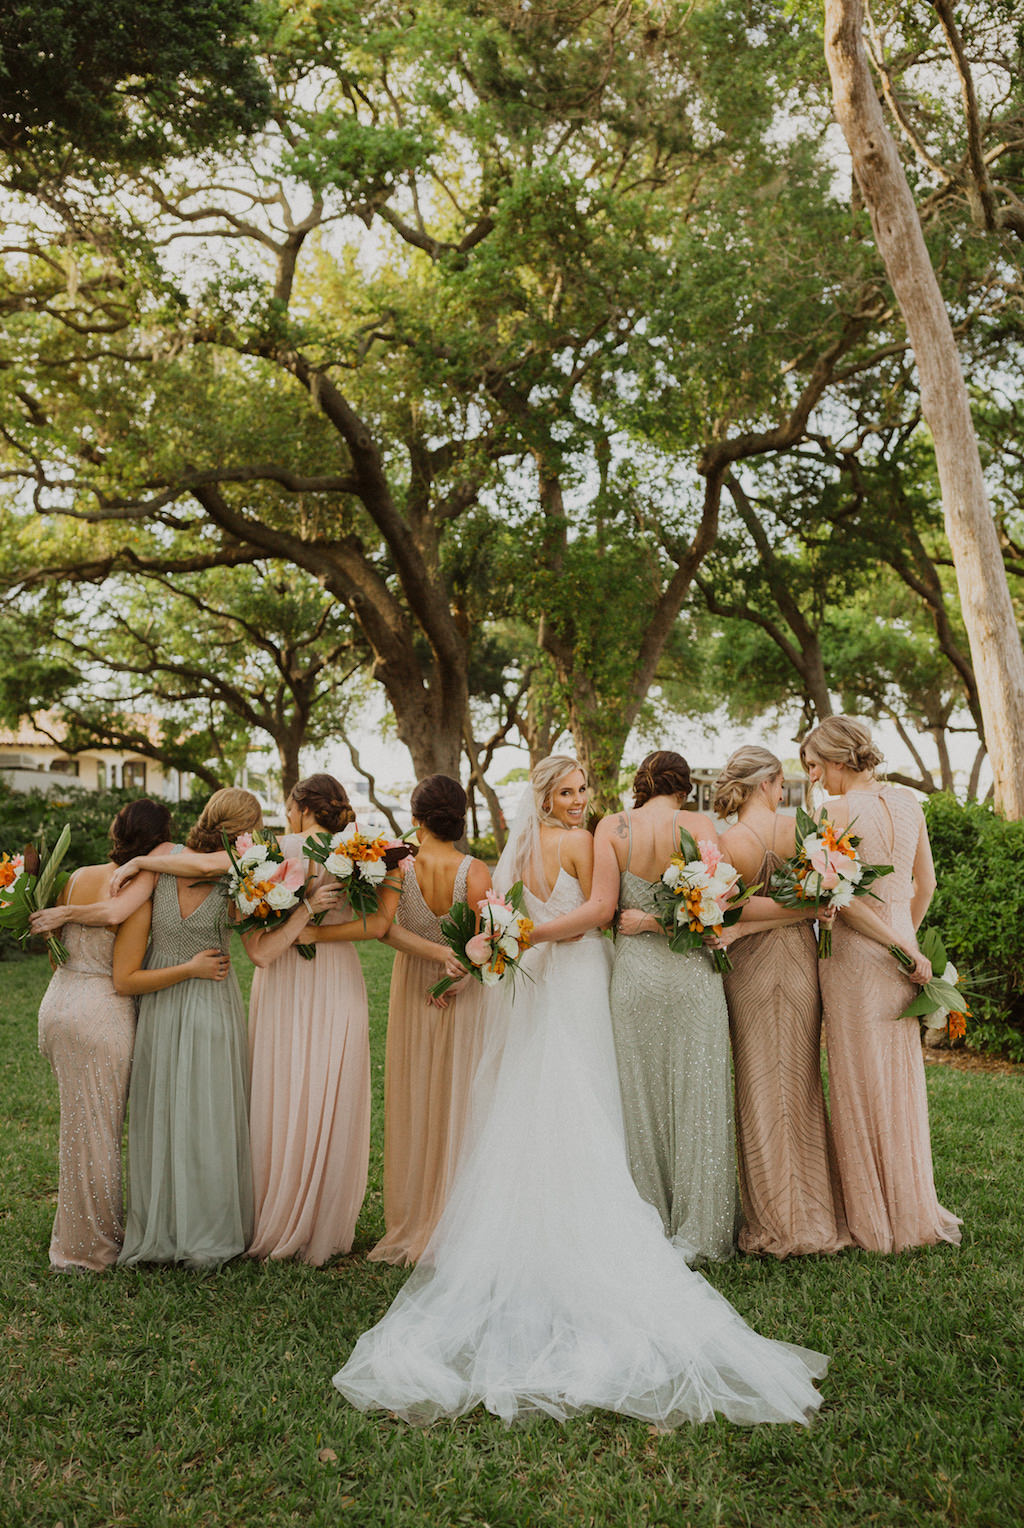 Florida Bride and Bridesmaids Wedding Portrait, Bride in Spaghetti Strap White Beaded Karen Willis Holmes Wedding Dress, Bridesmaids in Pastel Beige Sage and Blush Mix and Match Beaded Adrianna Papell Dresses, Carrying Tropical Wedding Bouquet with Colorful Flowers, Pink Ginger, Orchids, with Greenery in Longboat Key